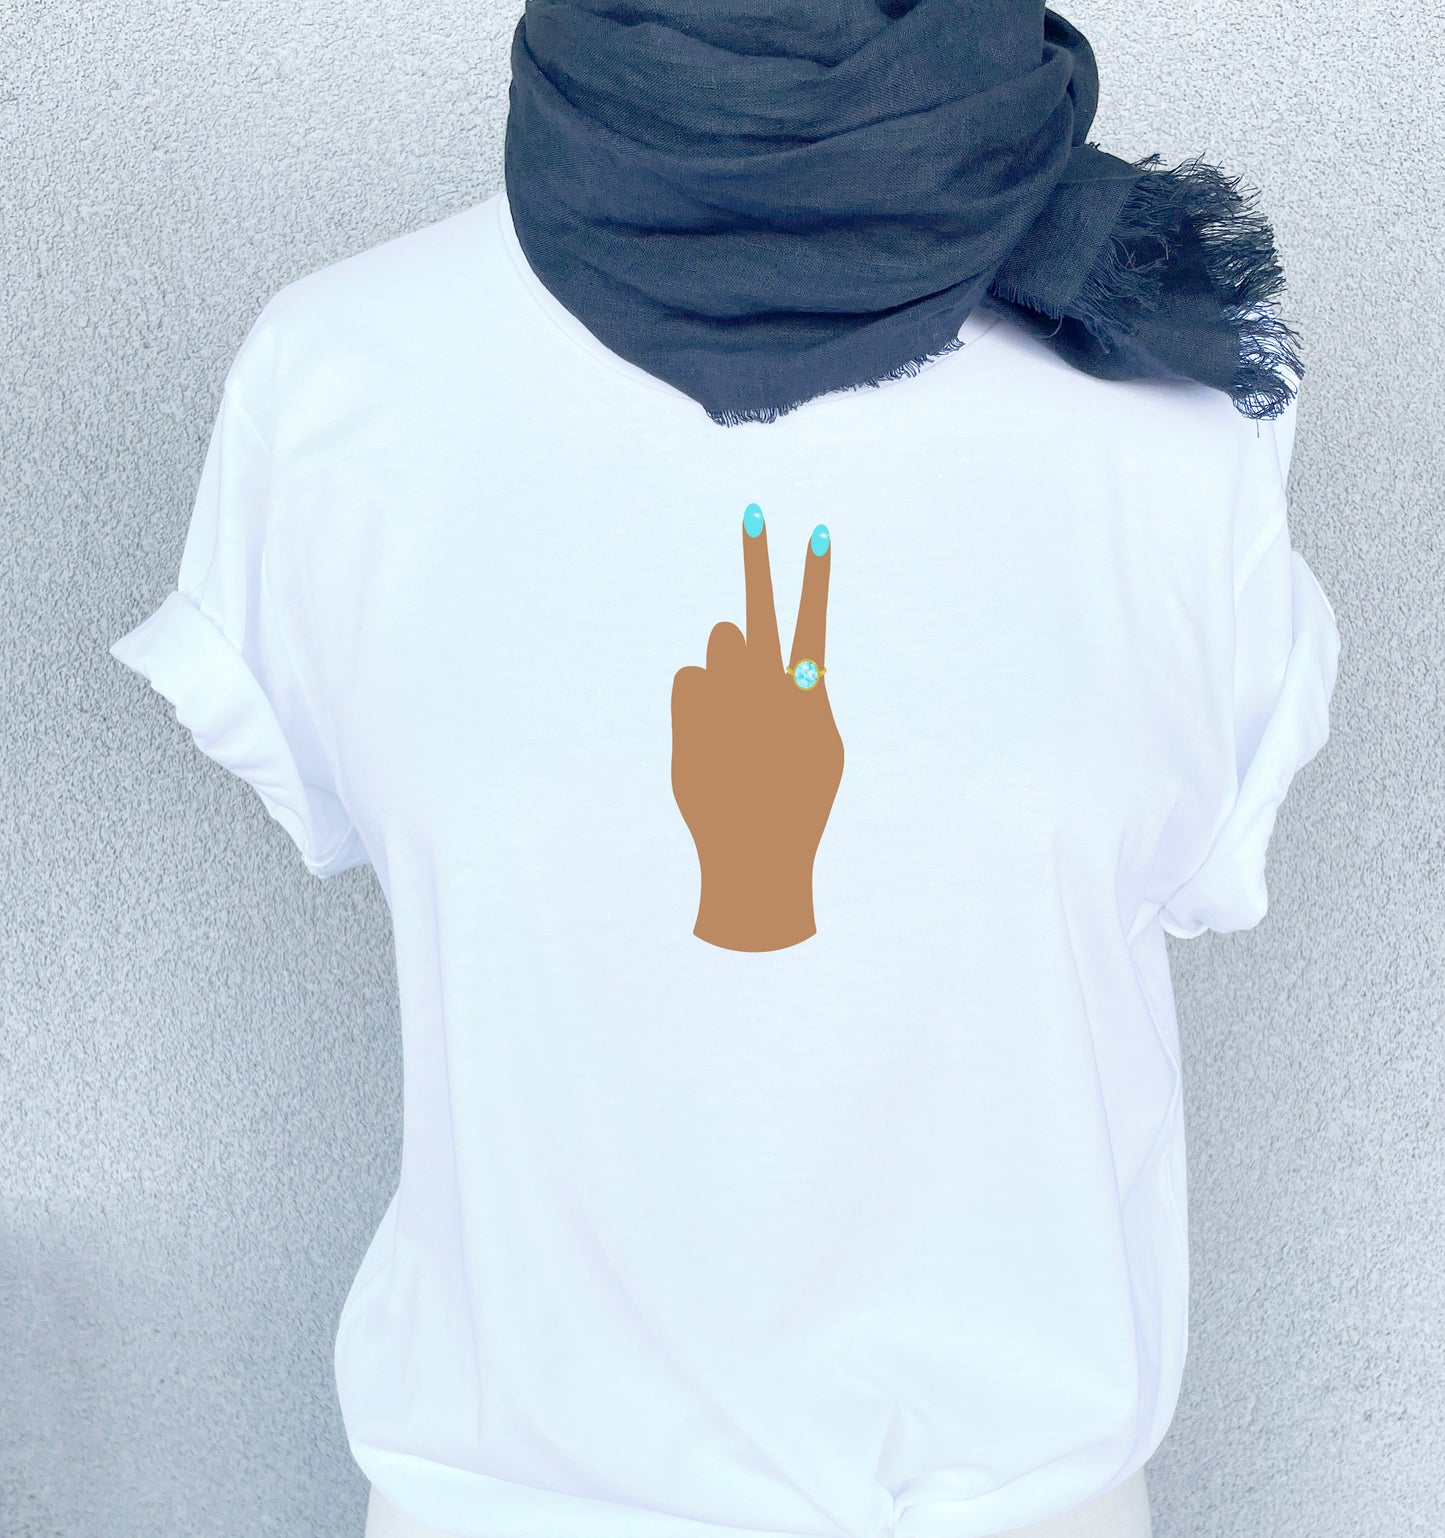 Peace Sign T-shirt, Style #2